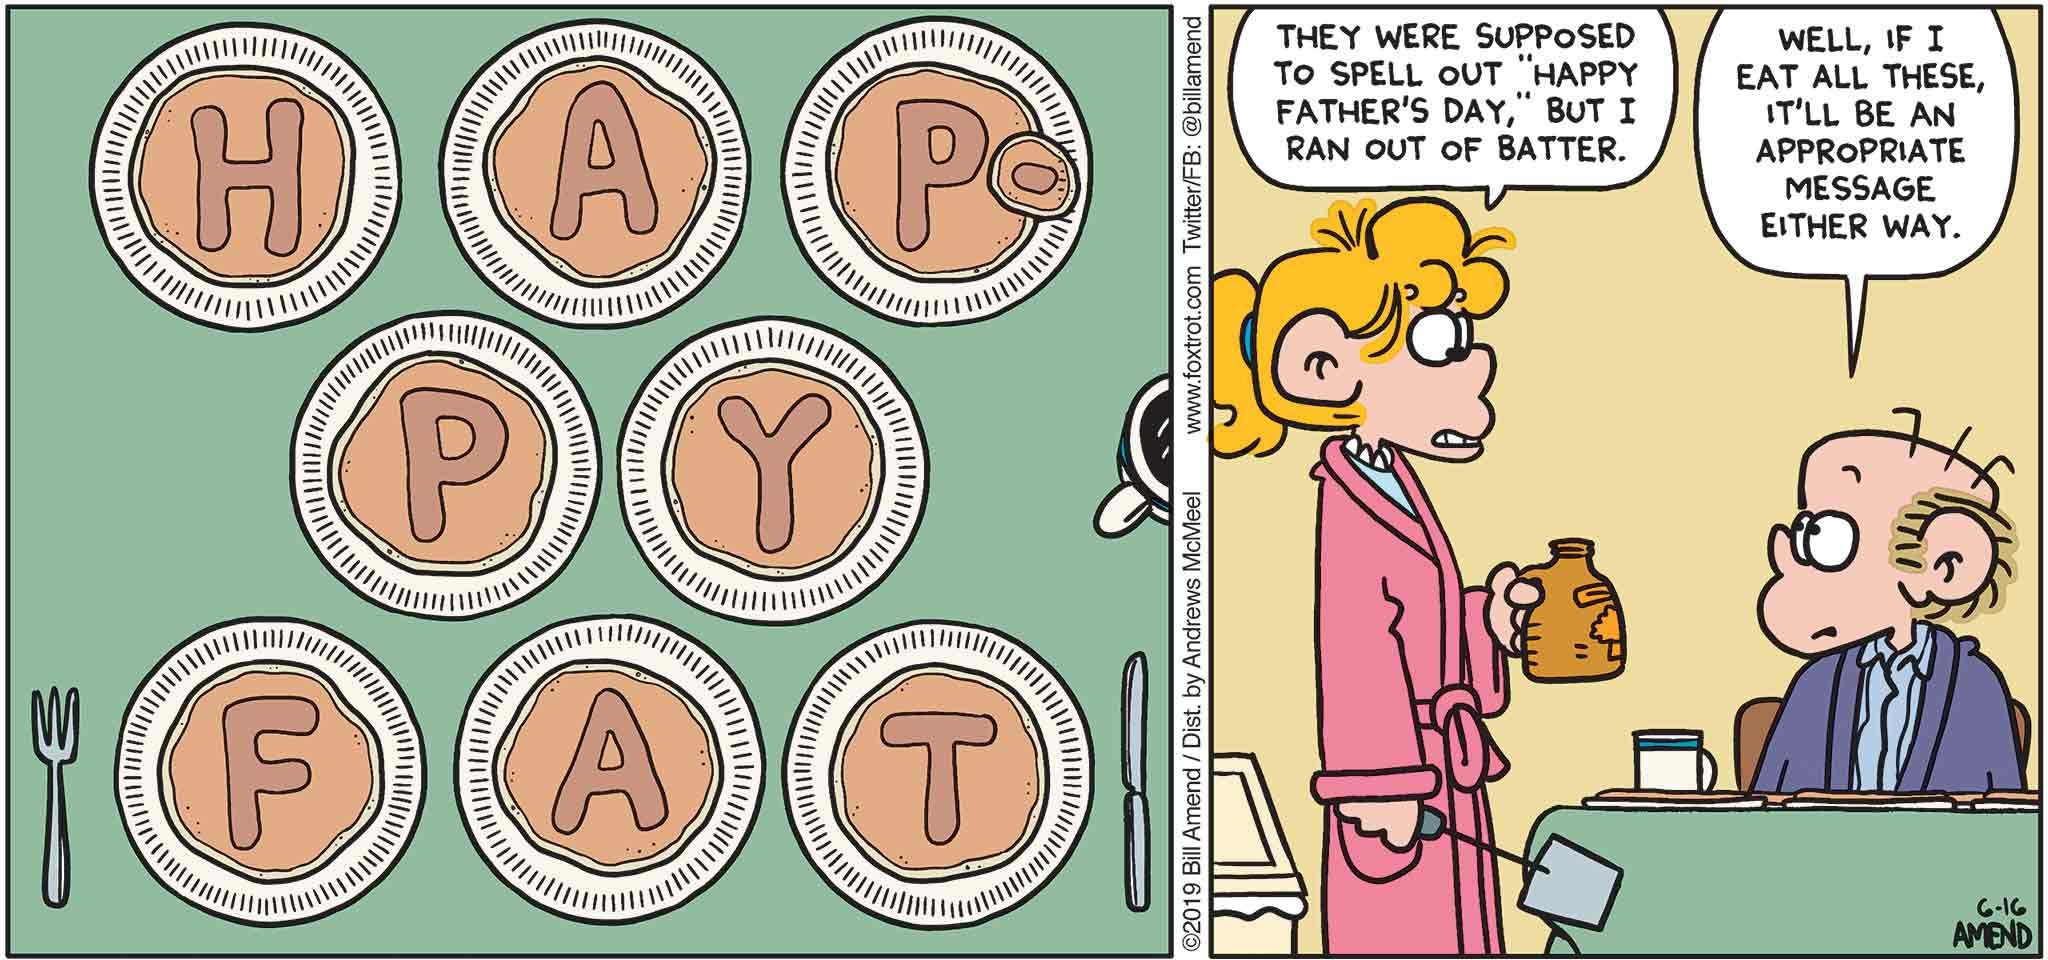 FoxTrot by Bill Amend - "Happy Fat" published June 16, 2019 - [Paige makes Roger pancakes for Father's Day] Paige: They were supposed to spell out "Happy Father's Day," but I ran out of batter. Roger: Well, if I can eat all these, it'll be an appropriate message either way.